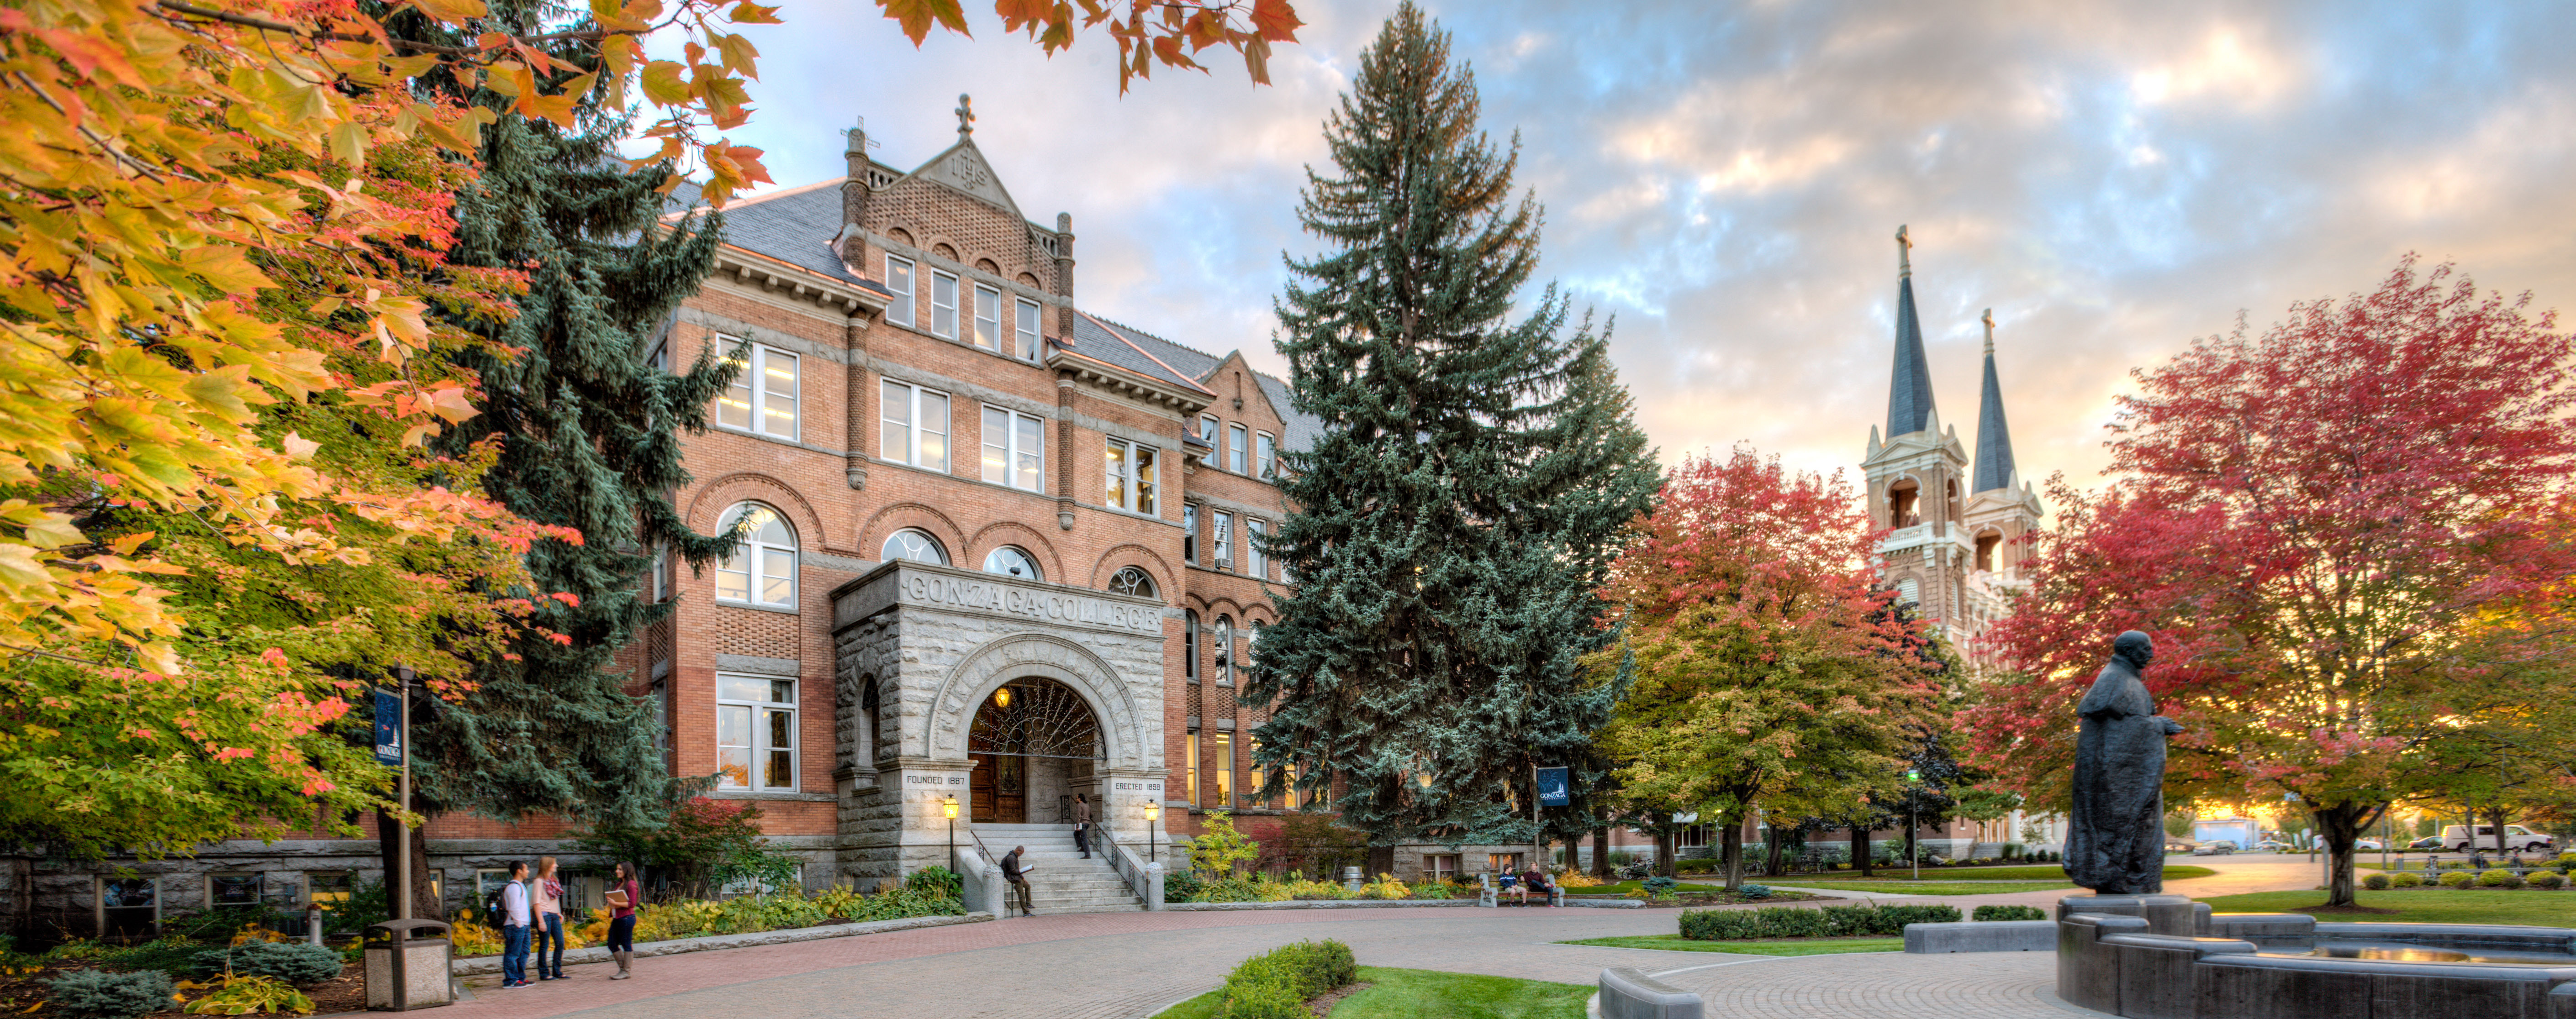 8 Things You Didn’t Know About Gonzaga University